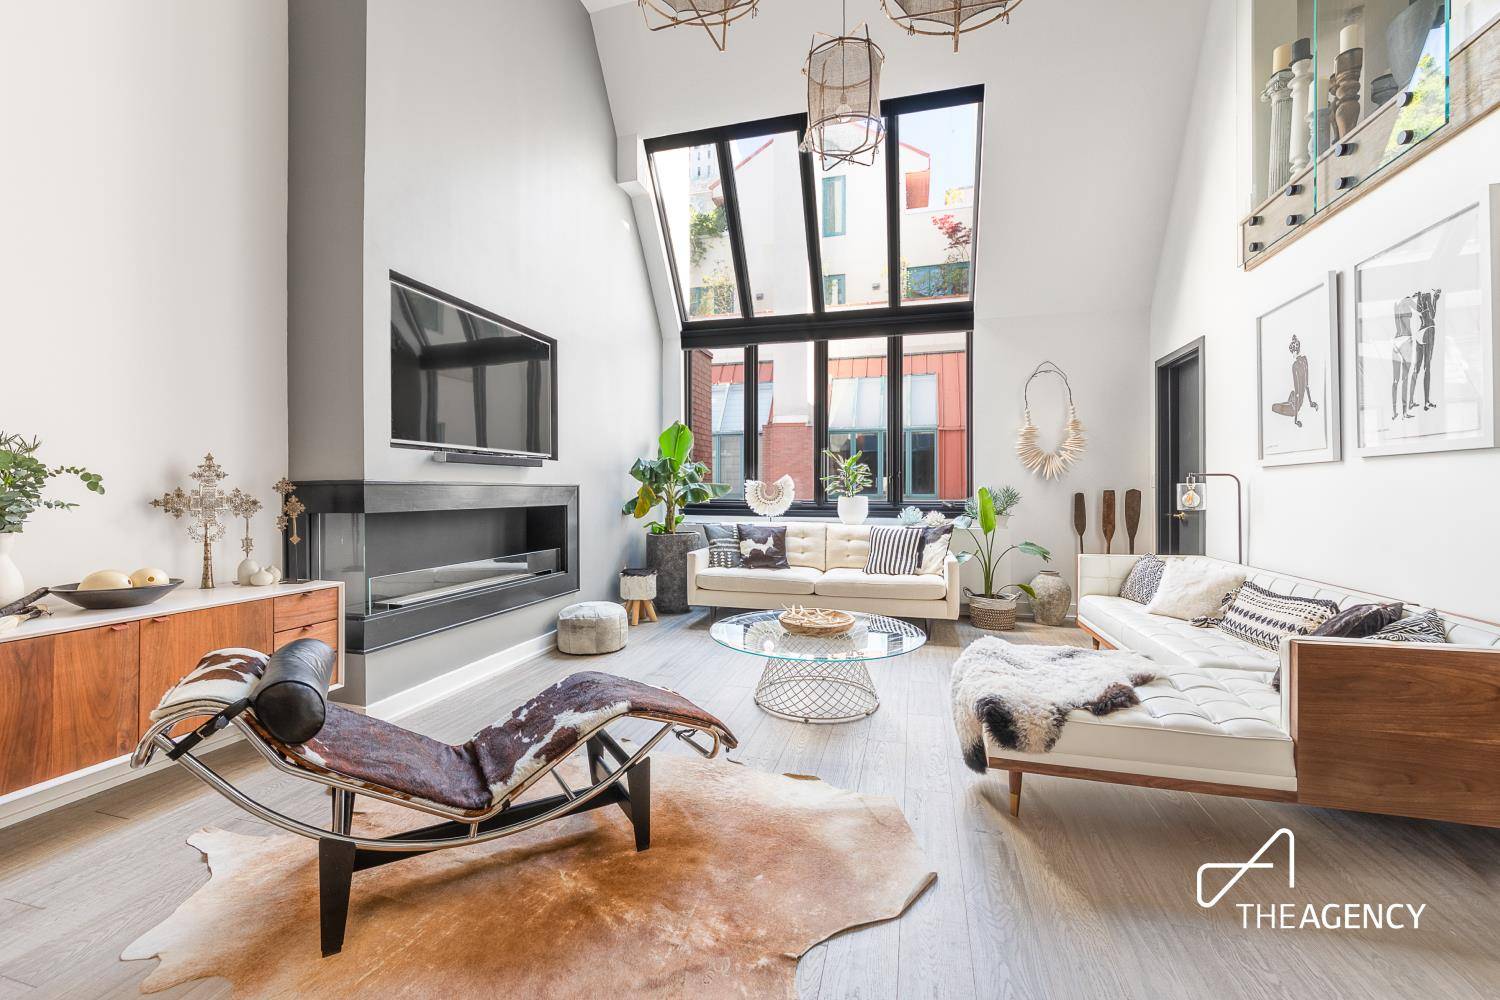 CYOF Available July ! st This newly renovated 3 convertible 4 bedroom luxury duplex condo apartment is straight out of an architectural magazine.